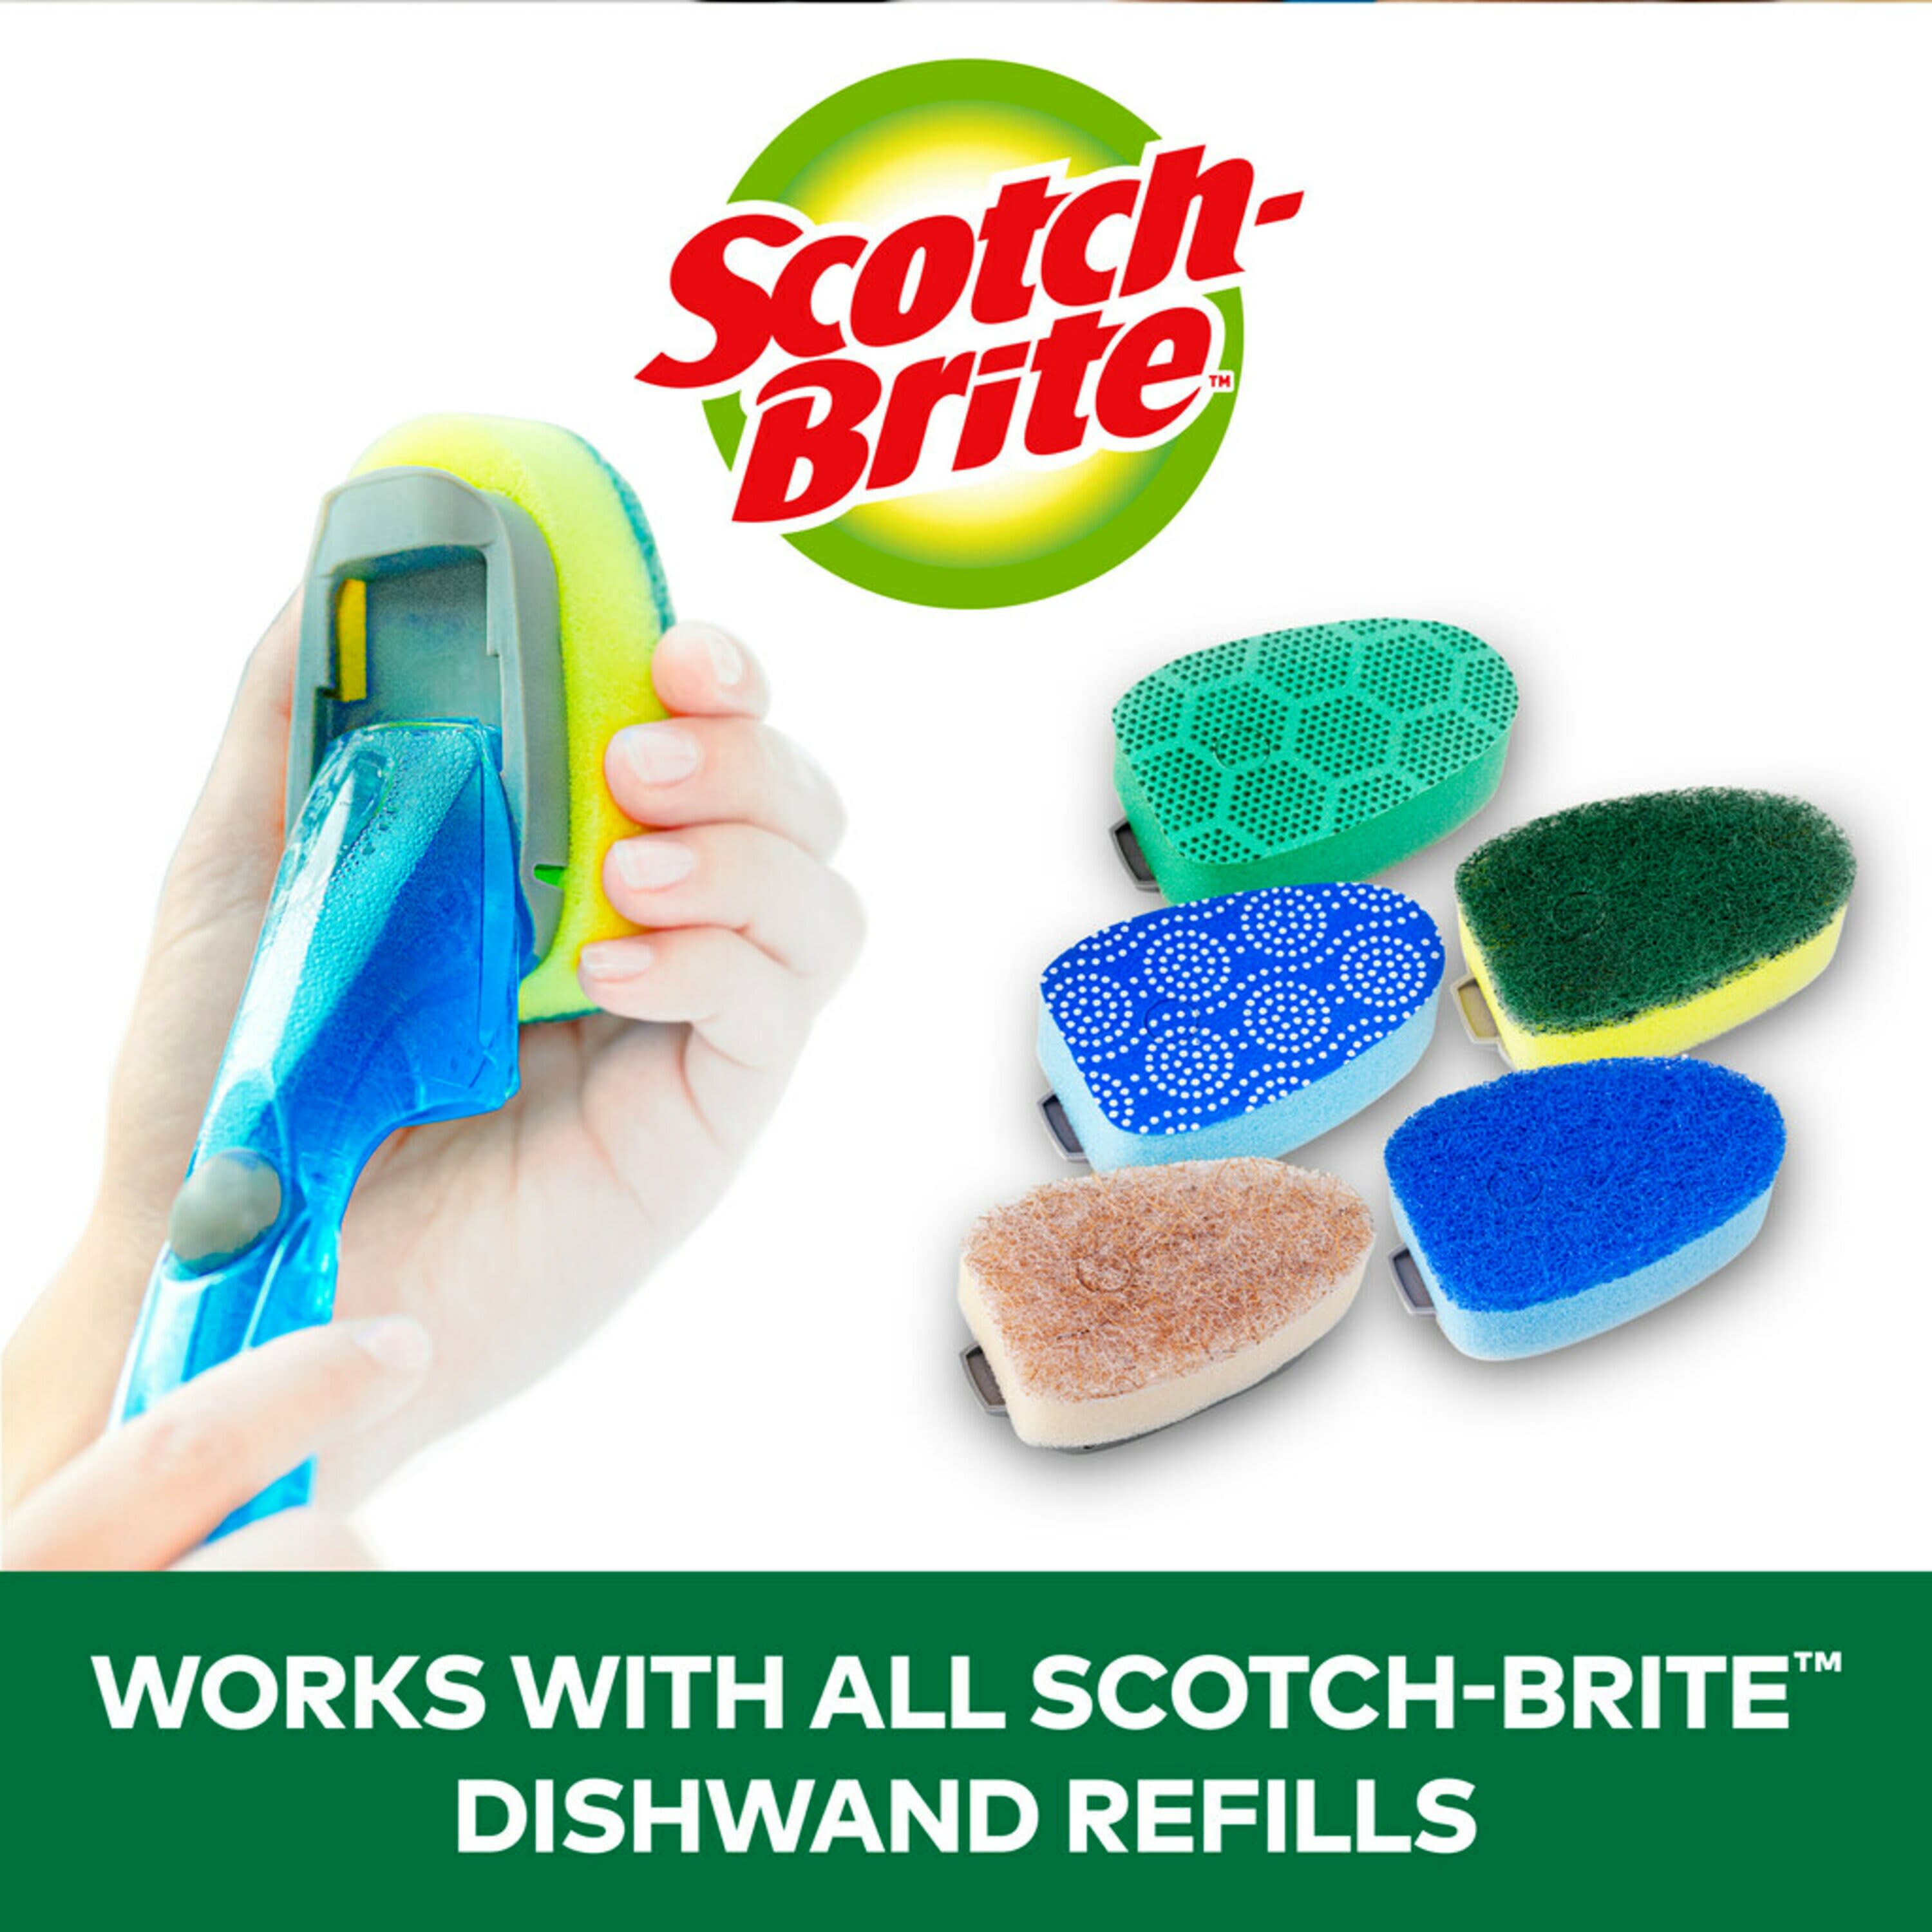 Scotch-Brite Advanced Soap Control Dishwand Brush Scrubber, Antibacterial*  Dish Wand Brush with Soap Dispenser with Dishwand Brush Refil, 3 Pack